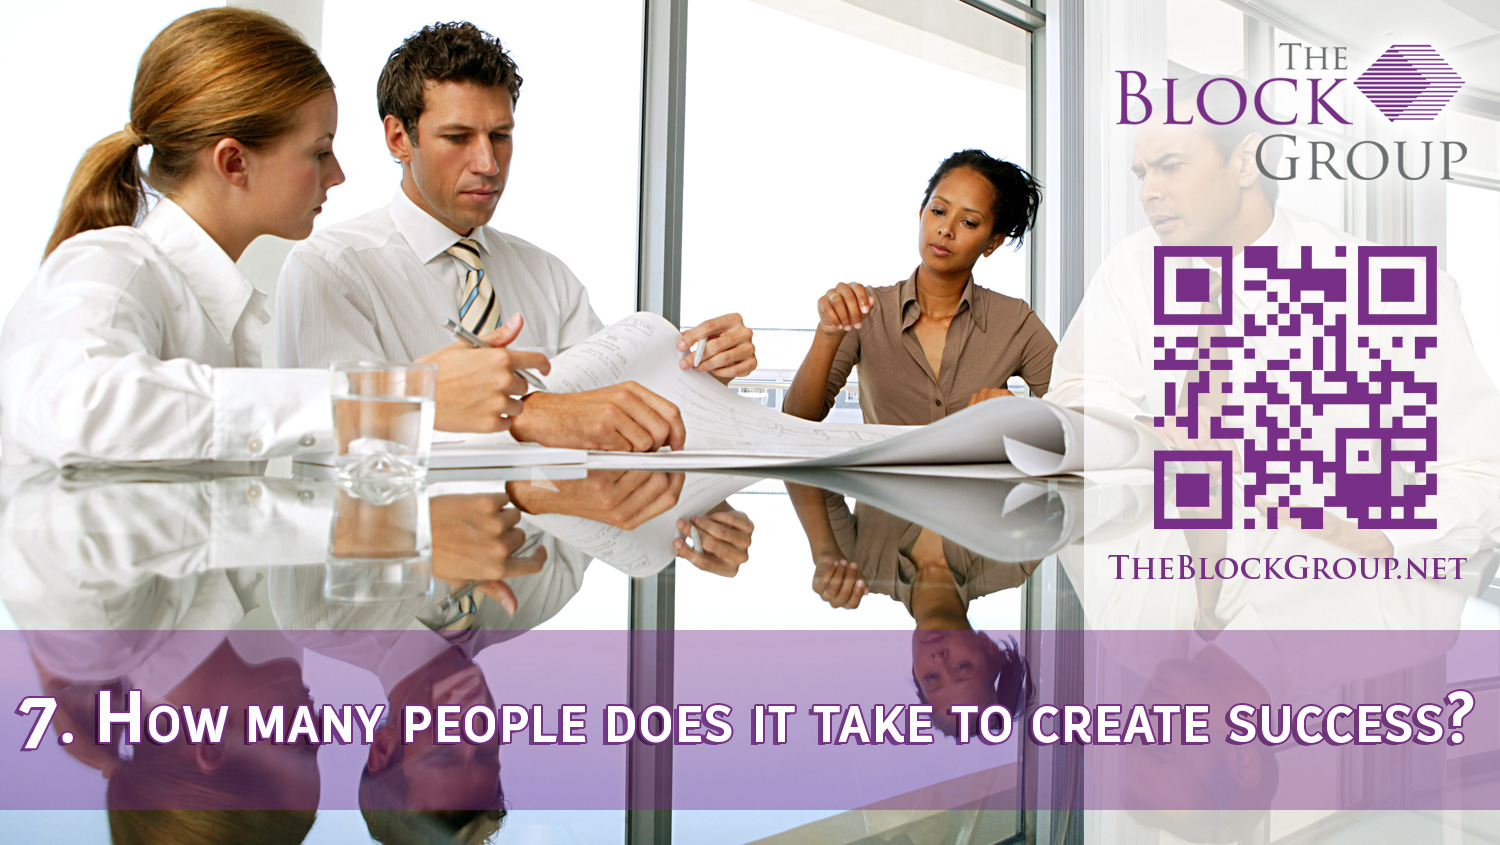 007.-How-many-people-does-it-take-to-create-success